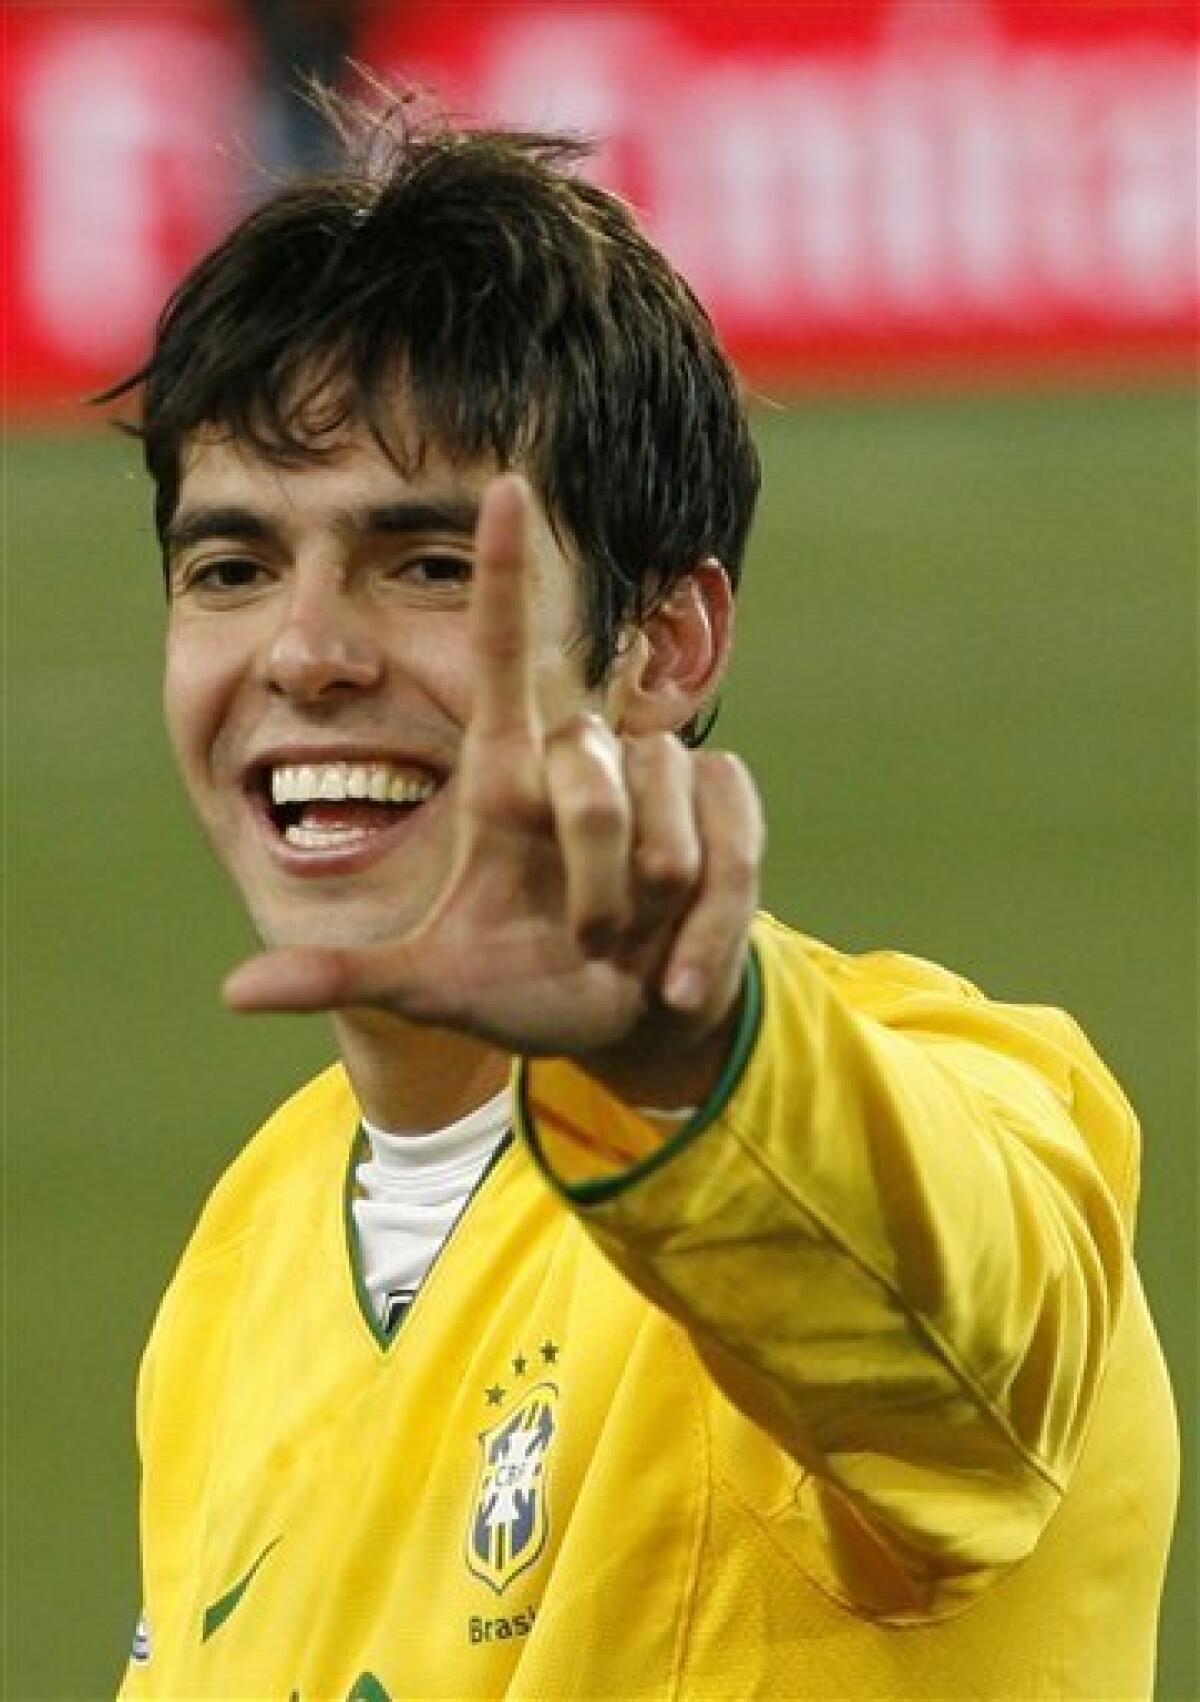 Brazil's Kaka gestures following their Confederations Cup final soccer match against the US at Ellis Park Stadium in Johannesburg, South Africa, Sunday, June 28, 2009. Brazil won 3-2. (AP Photo/Paul Thomas)